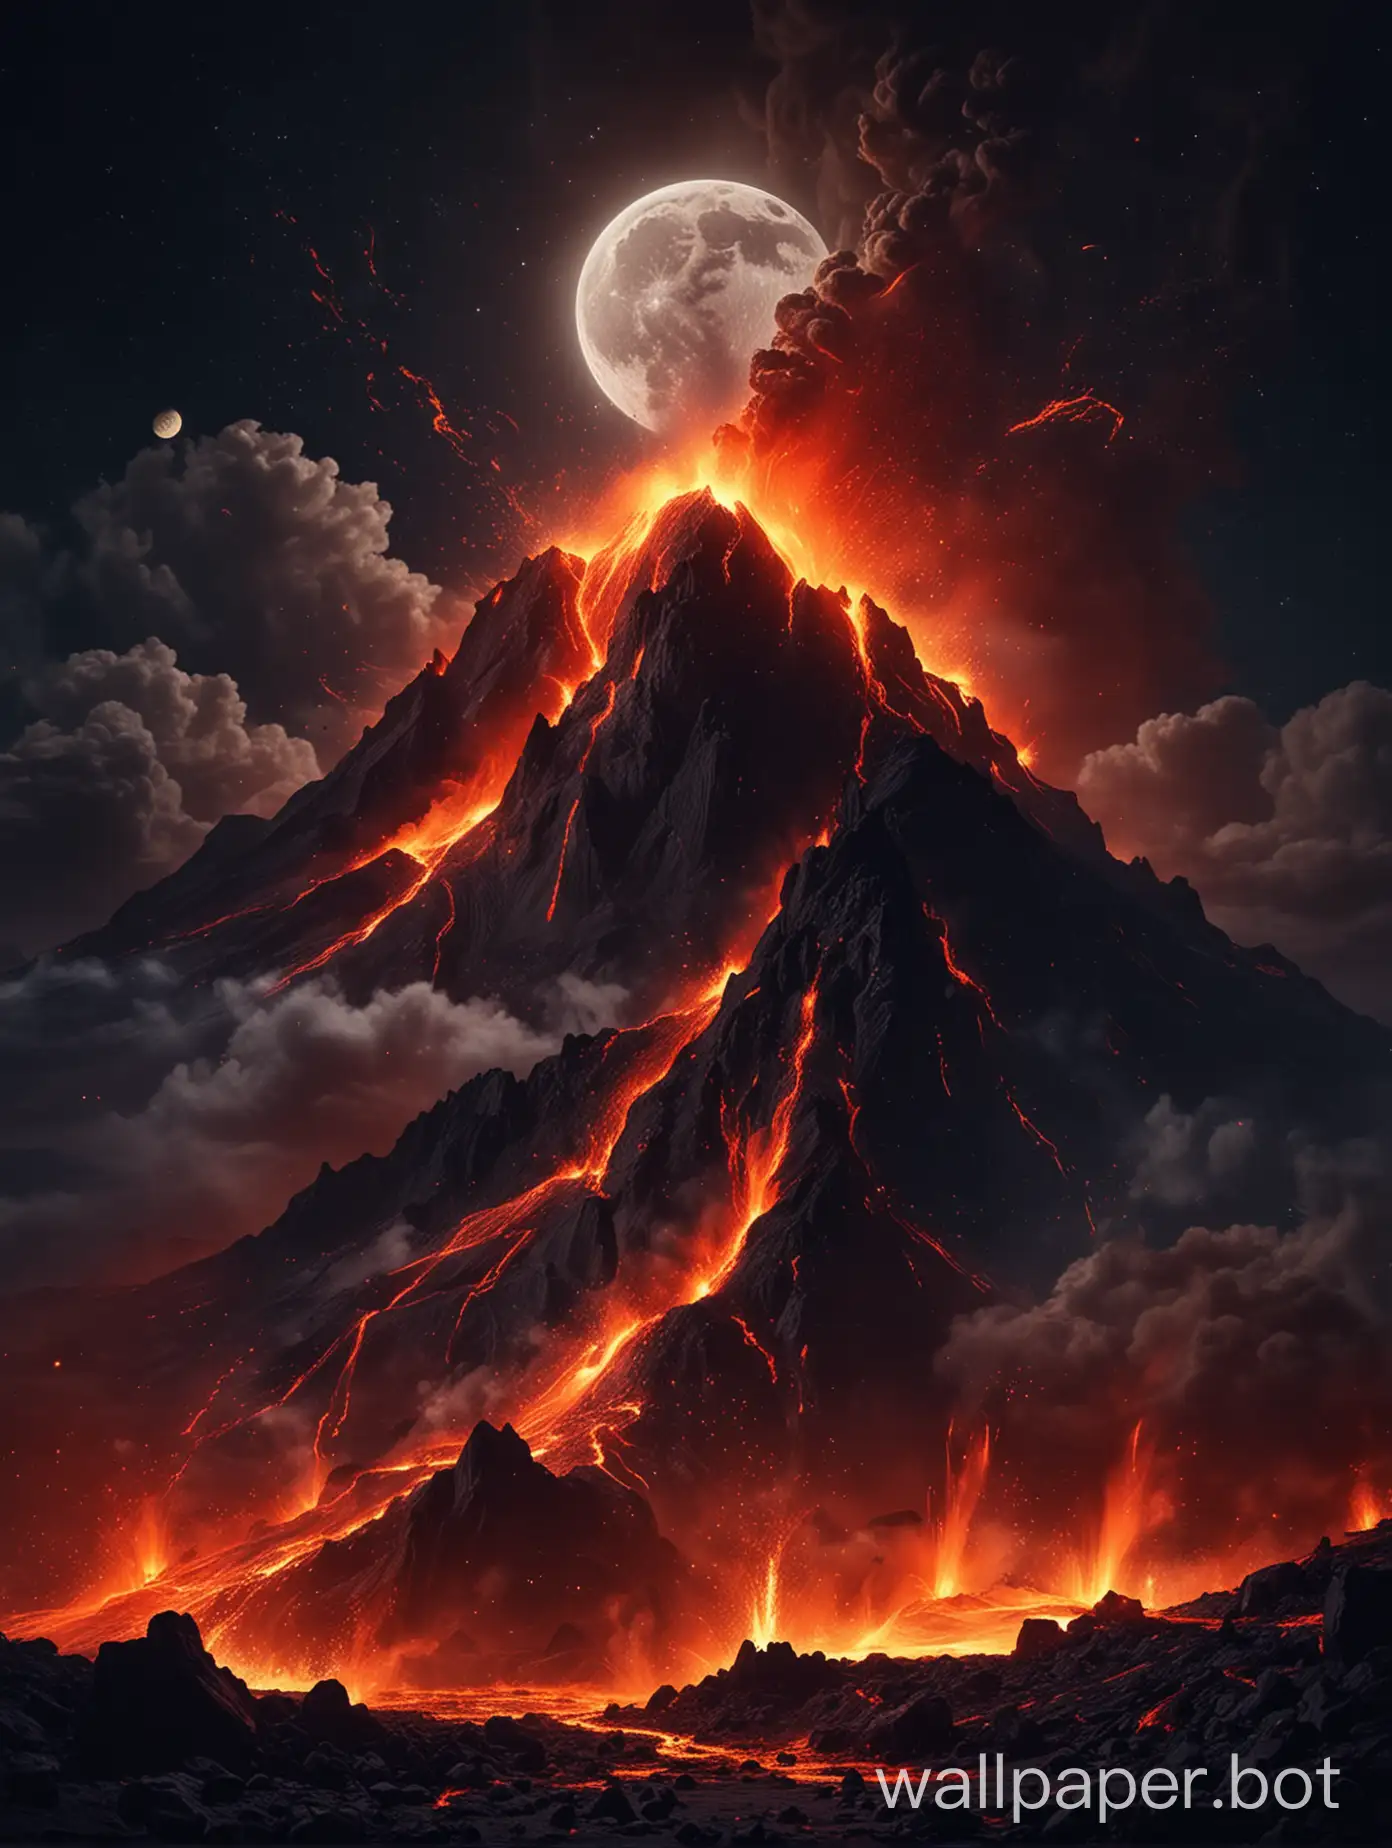 Majestic-Volcanic-Eruption-with-Lava-Flowing-Downhill-under-a-Moonlit-Sky